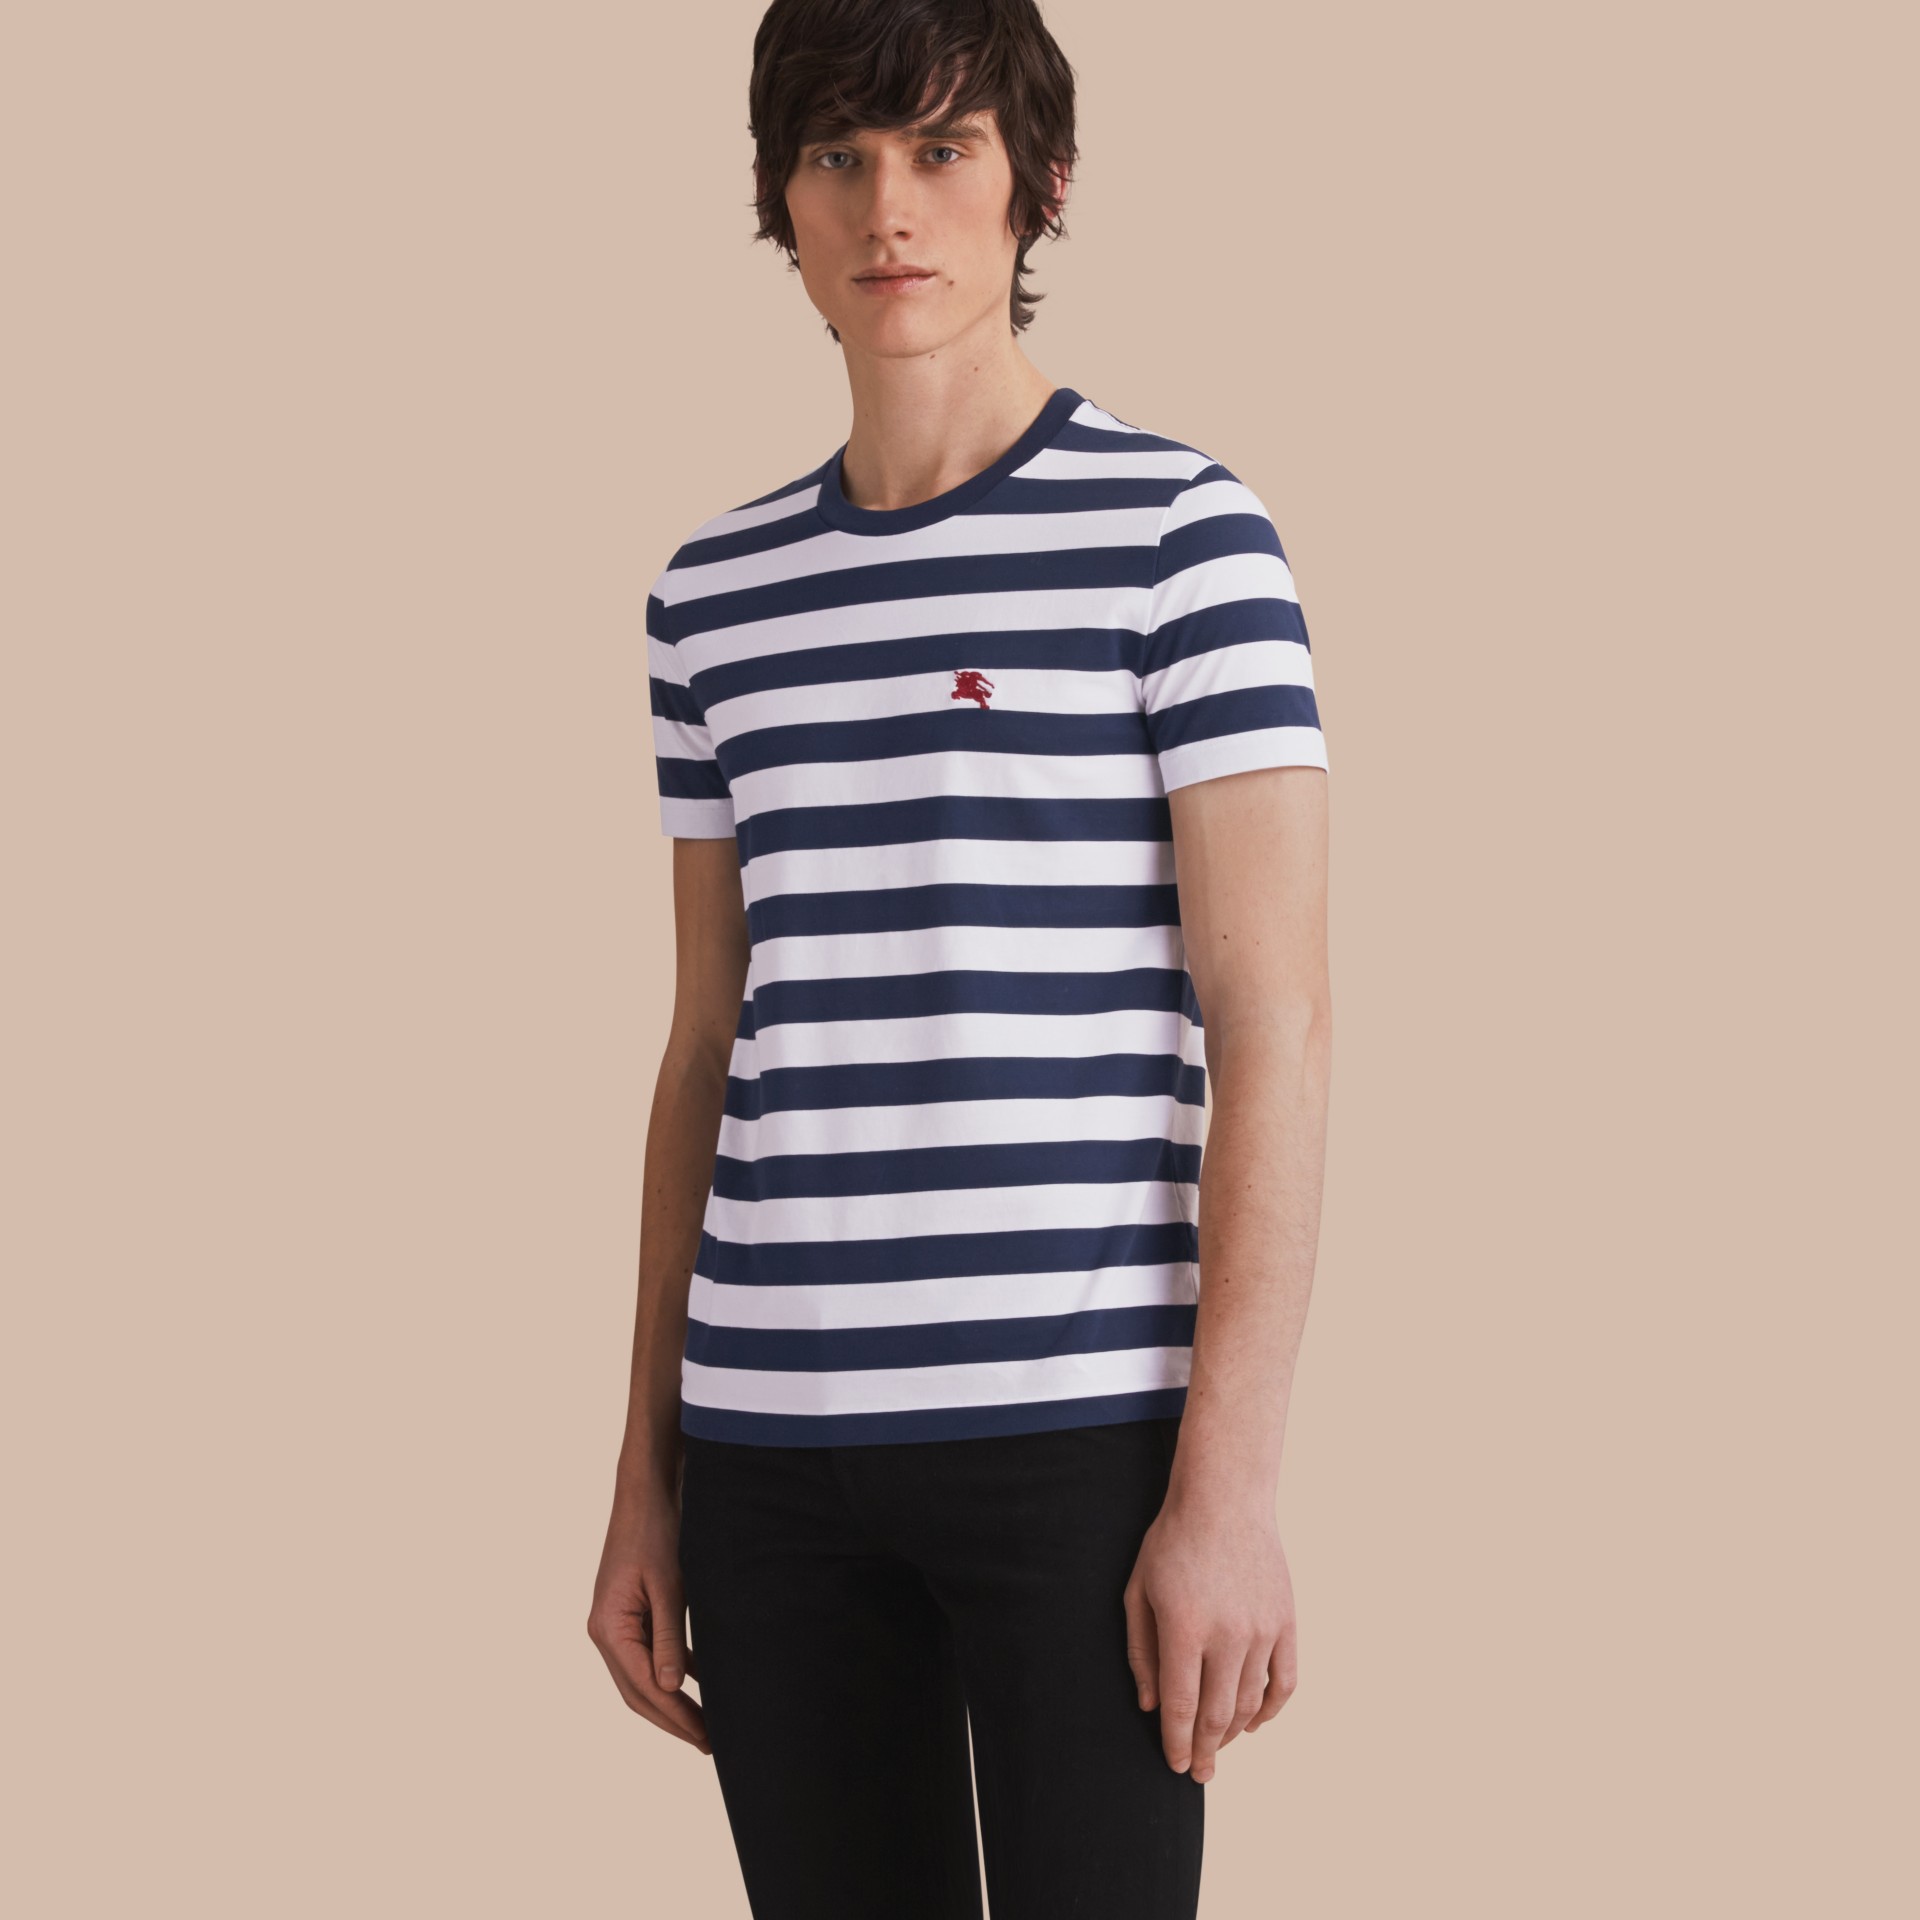 Striped Cotton T-Shirt in White/navy - Men | Burberry United States